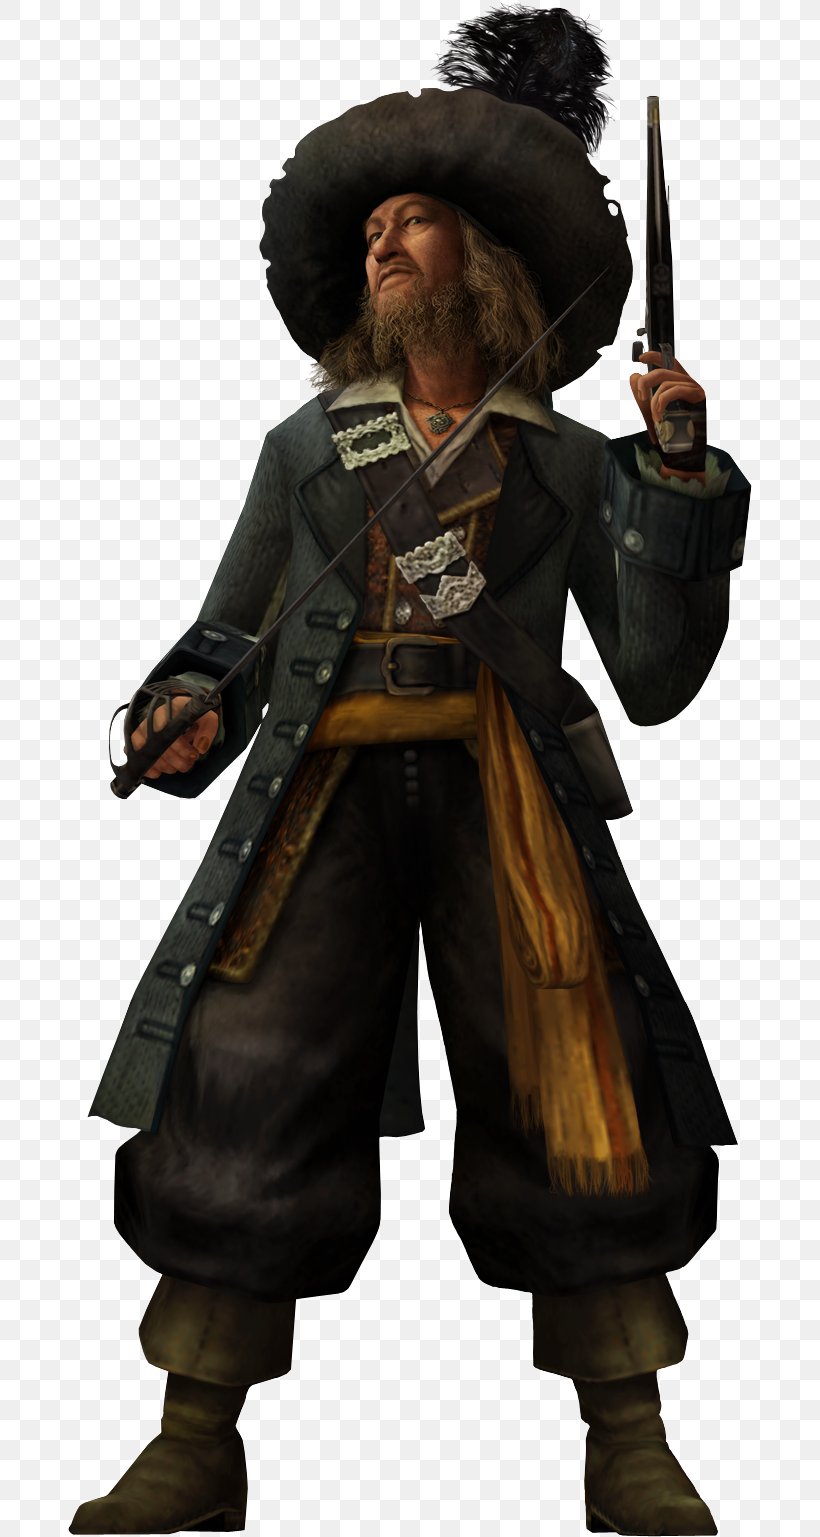 Hector Barbossa Kingdom Hearts II Jack Sparrow Pirates Of The Caribbean: The Curse Of The Black Pearl Captain Hook, PNG, 684x1537px, Hector Barbossa, Black Pearl, Captain Hook, Costume, Curse Download Free